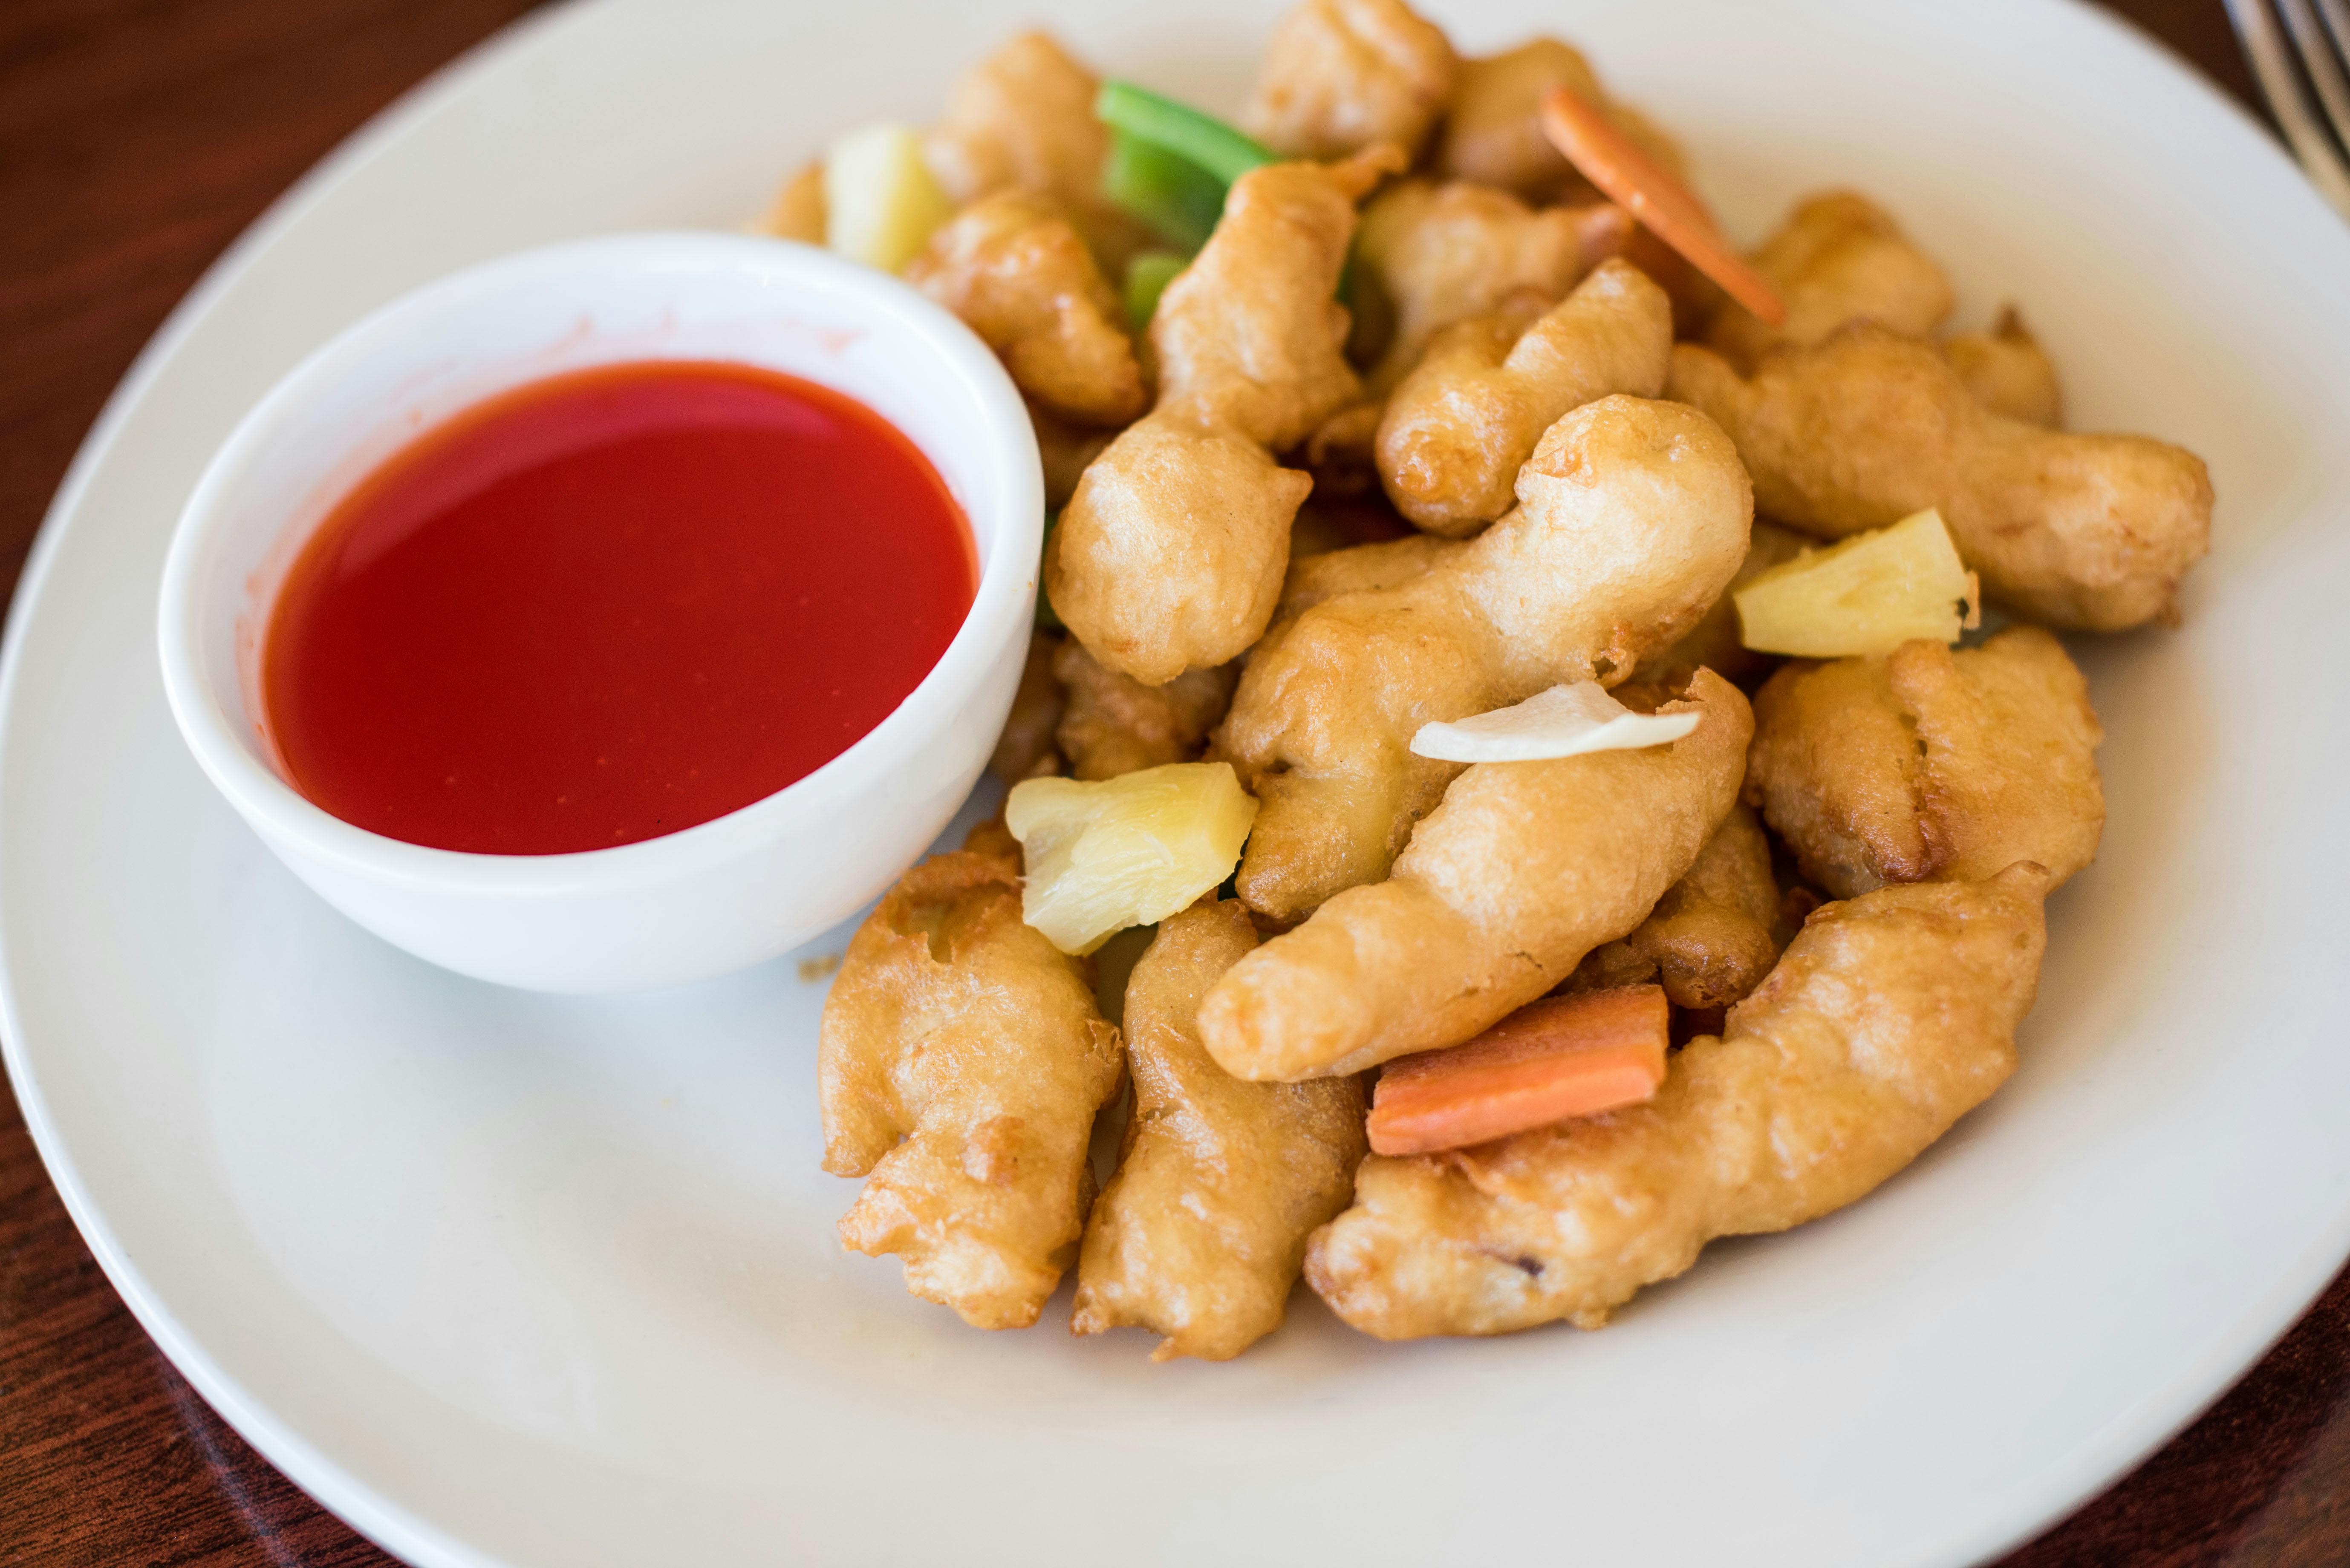 61. Sweet & Sour Chicken from Lucky Liu's in Milwaukee, WI